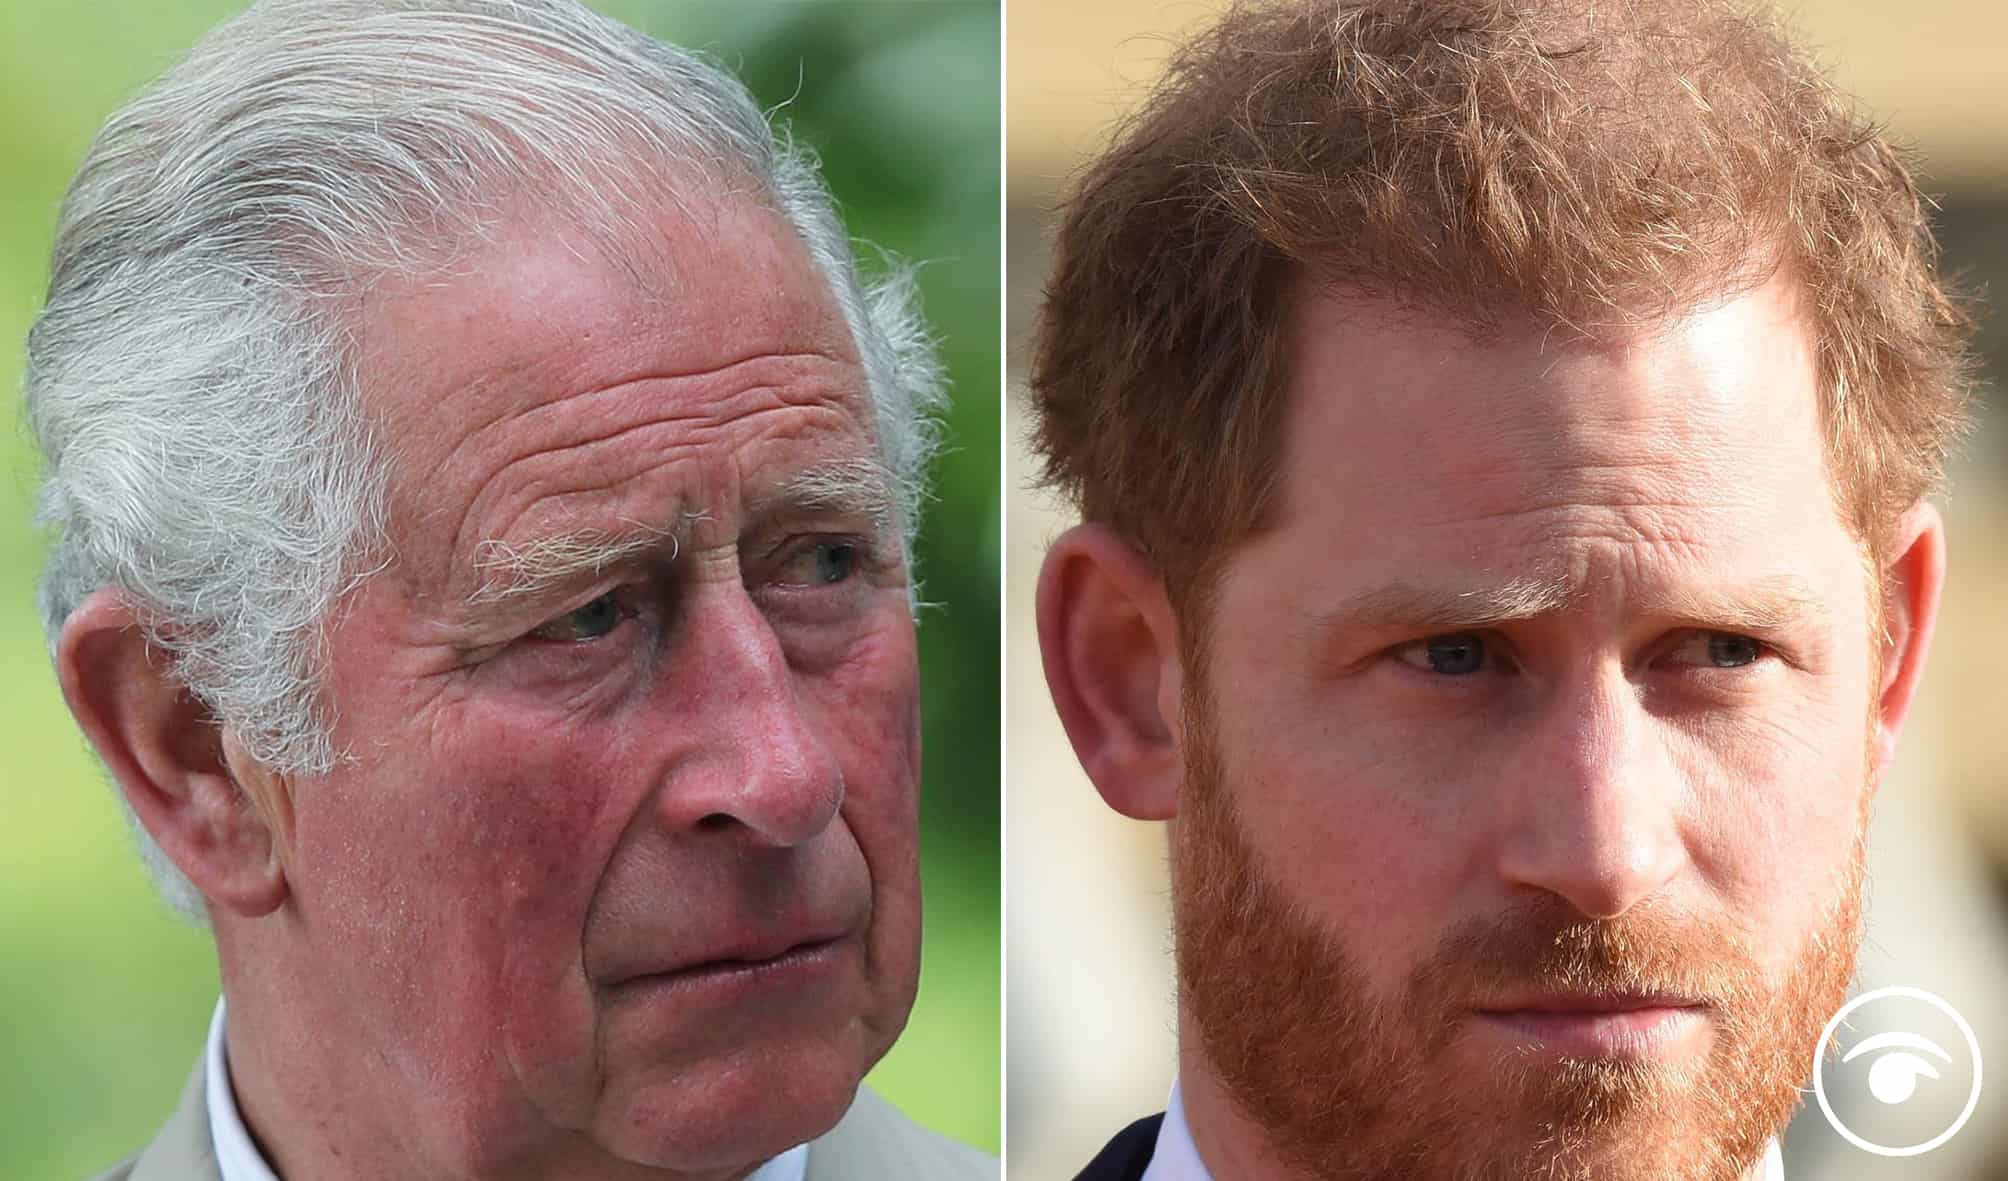 ‘Total neglect’: Harry slams royal family and admits drug-taking in bombshell interview